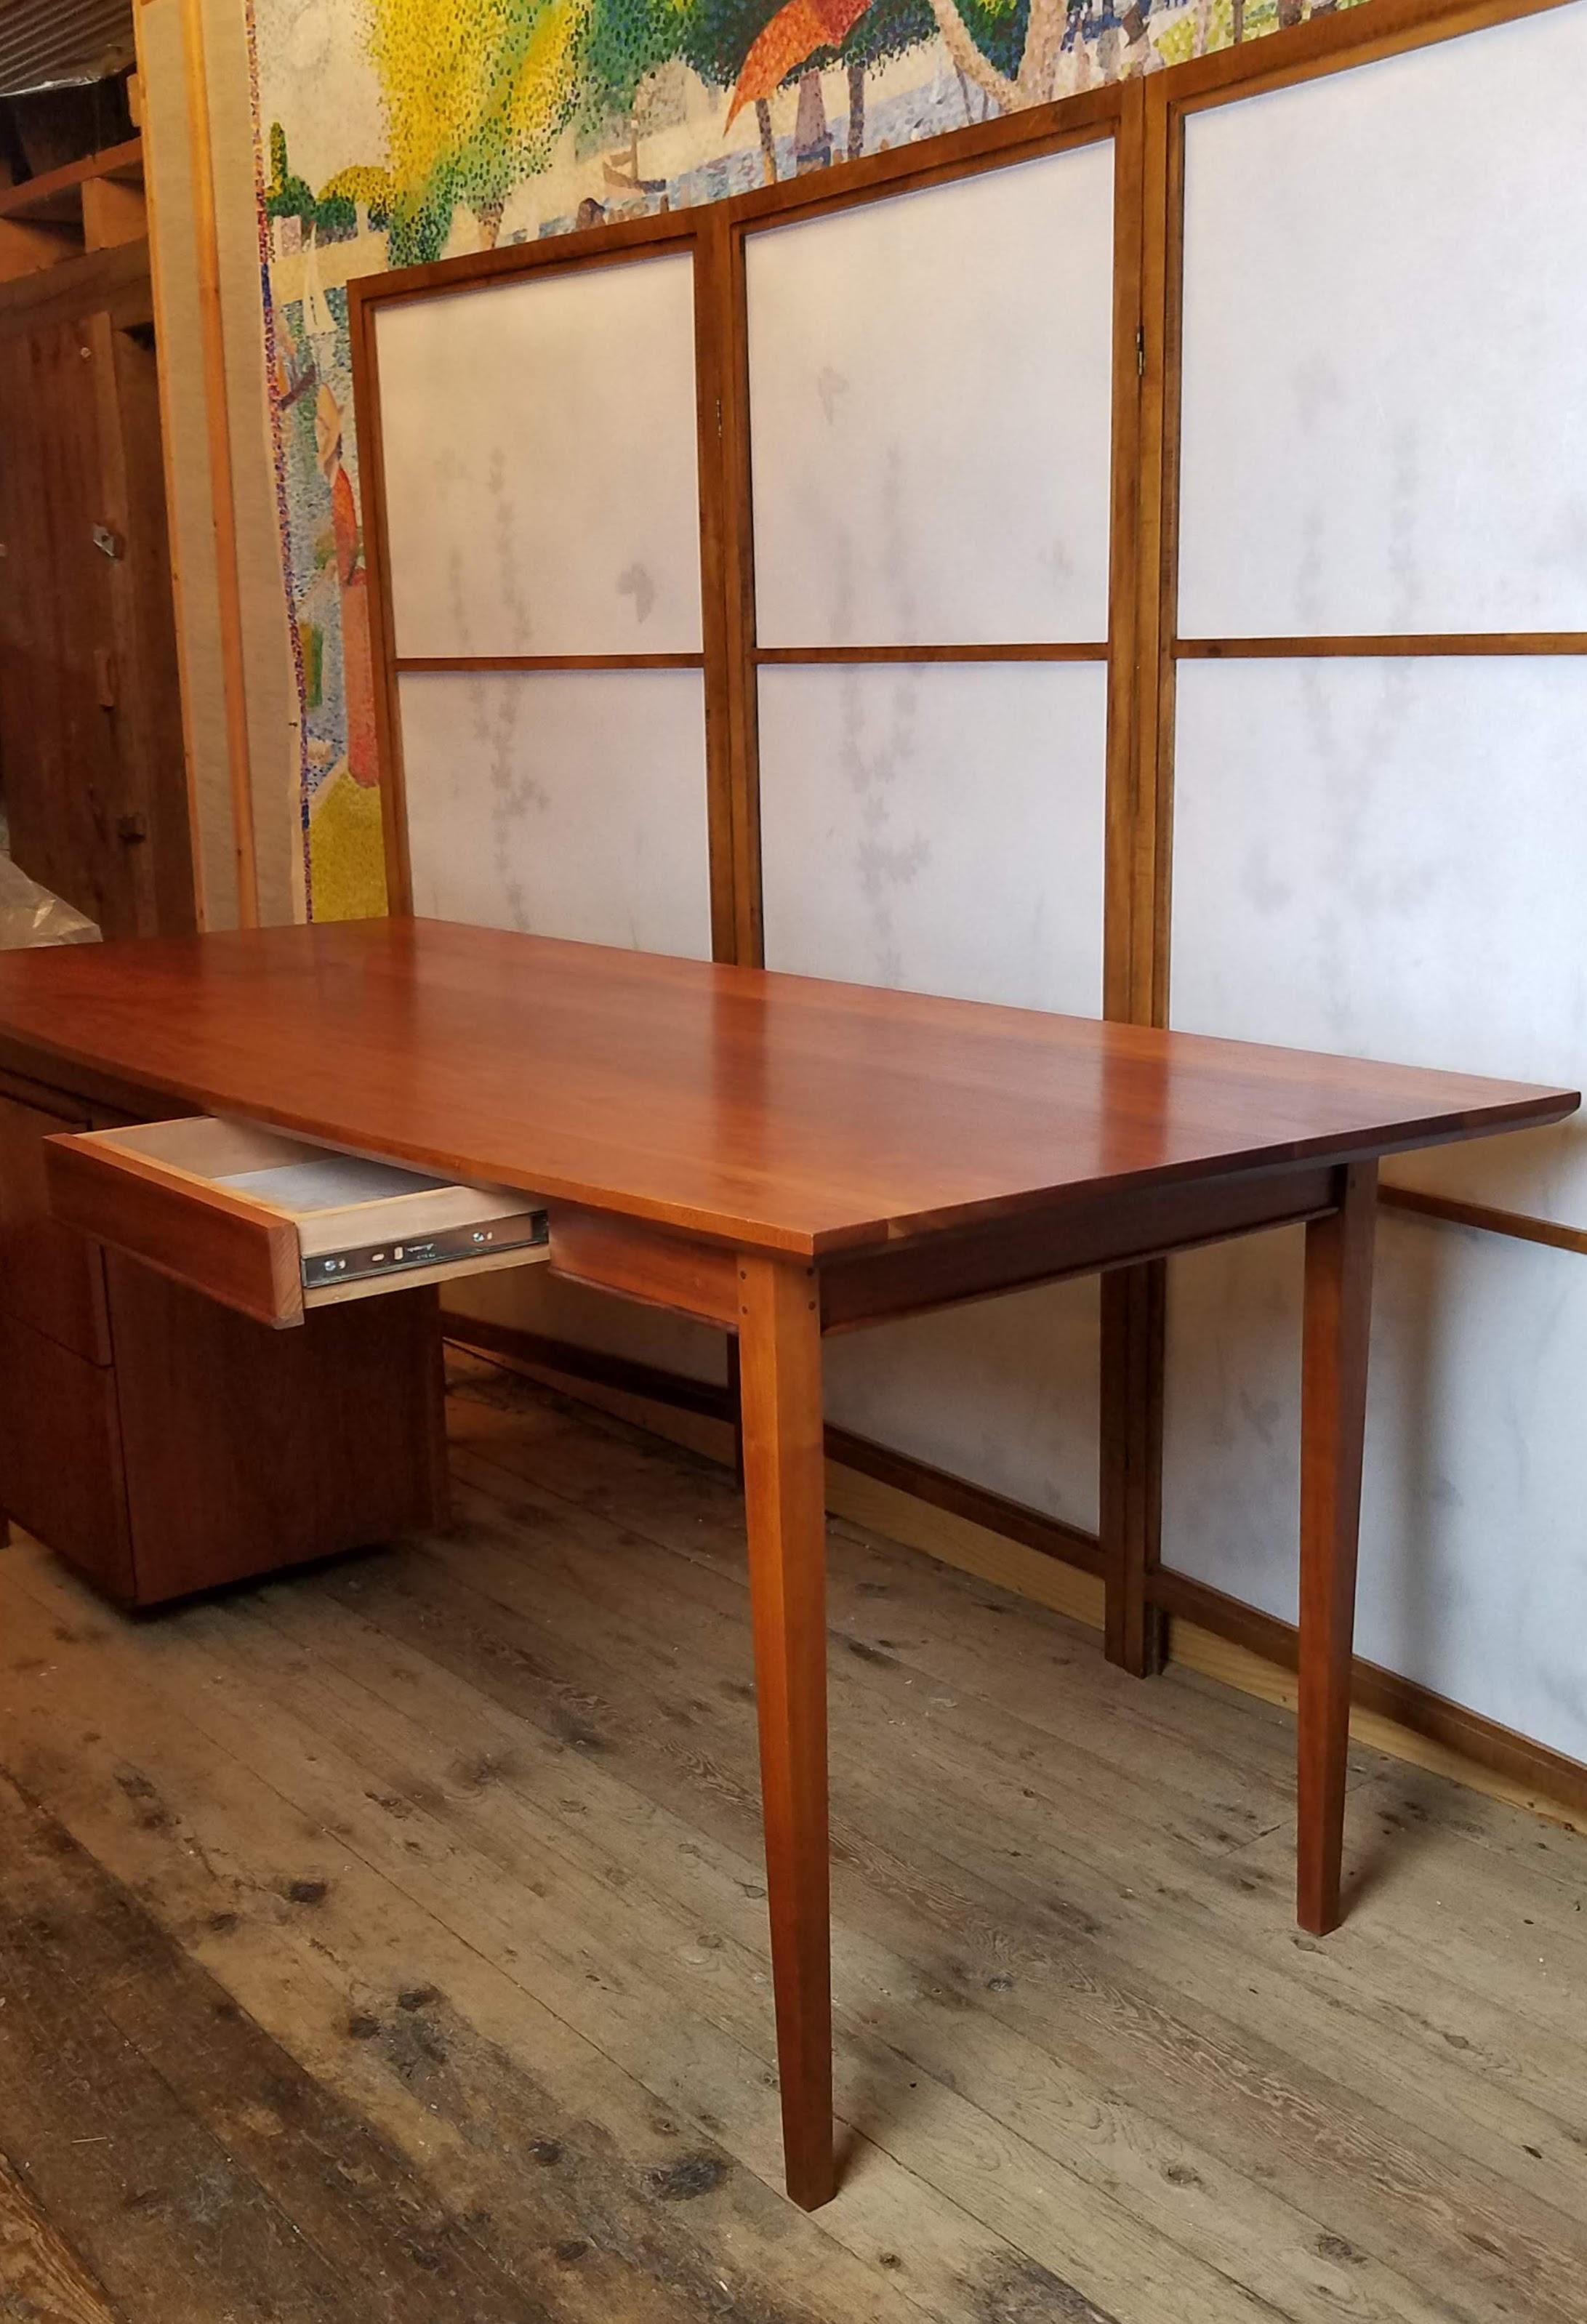 Bowed Front Solid Cherry Desk with Suspended Drawers Maine Studio 1980s In Good Condition For Sale In Camden, ME